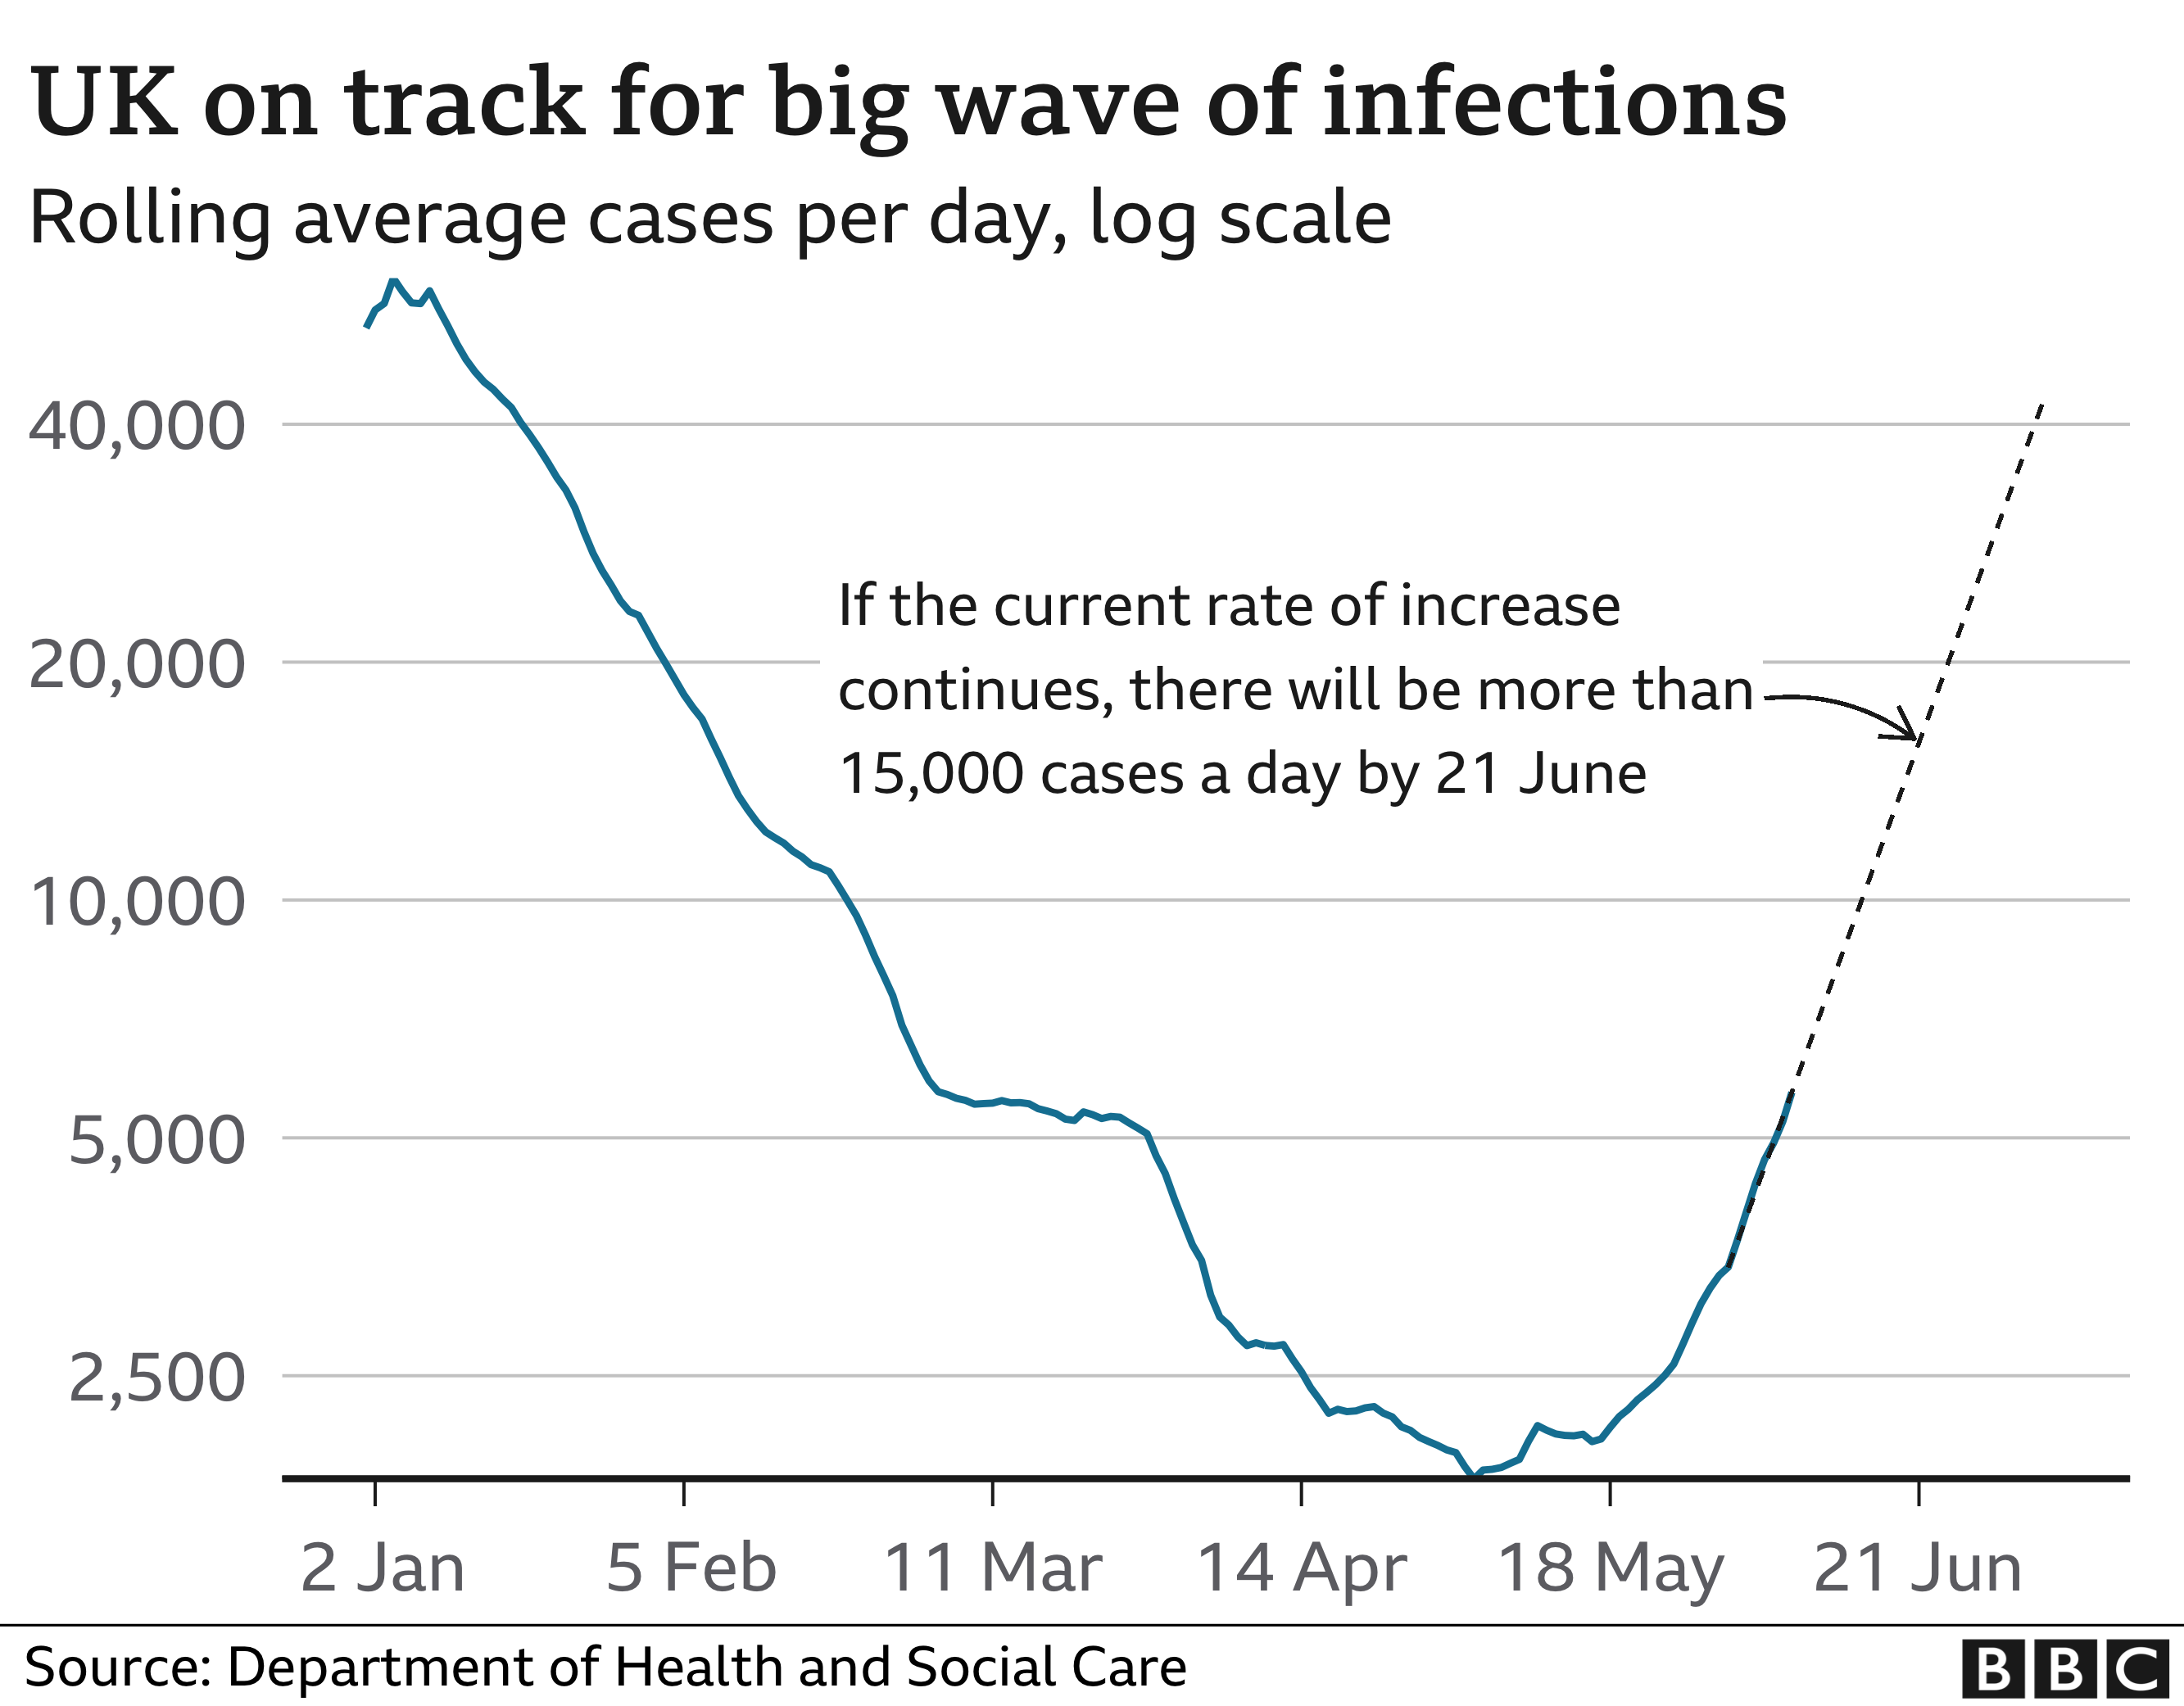 UK on track for wave of infections 11-6-2021 - enlarge